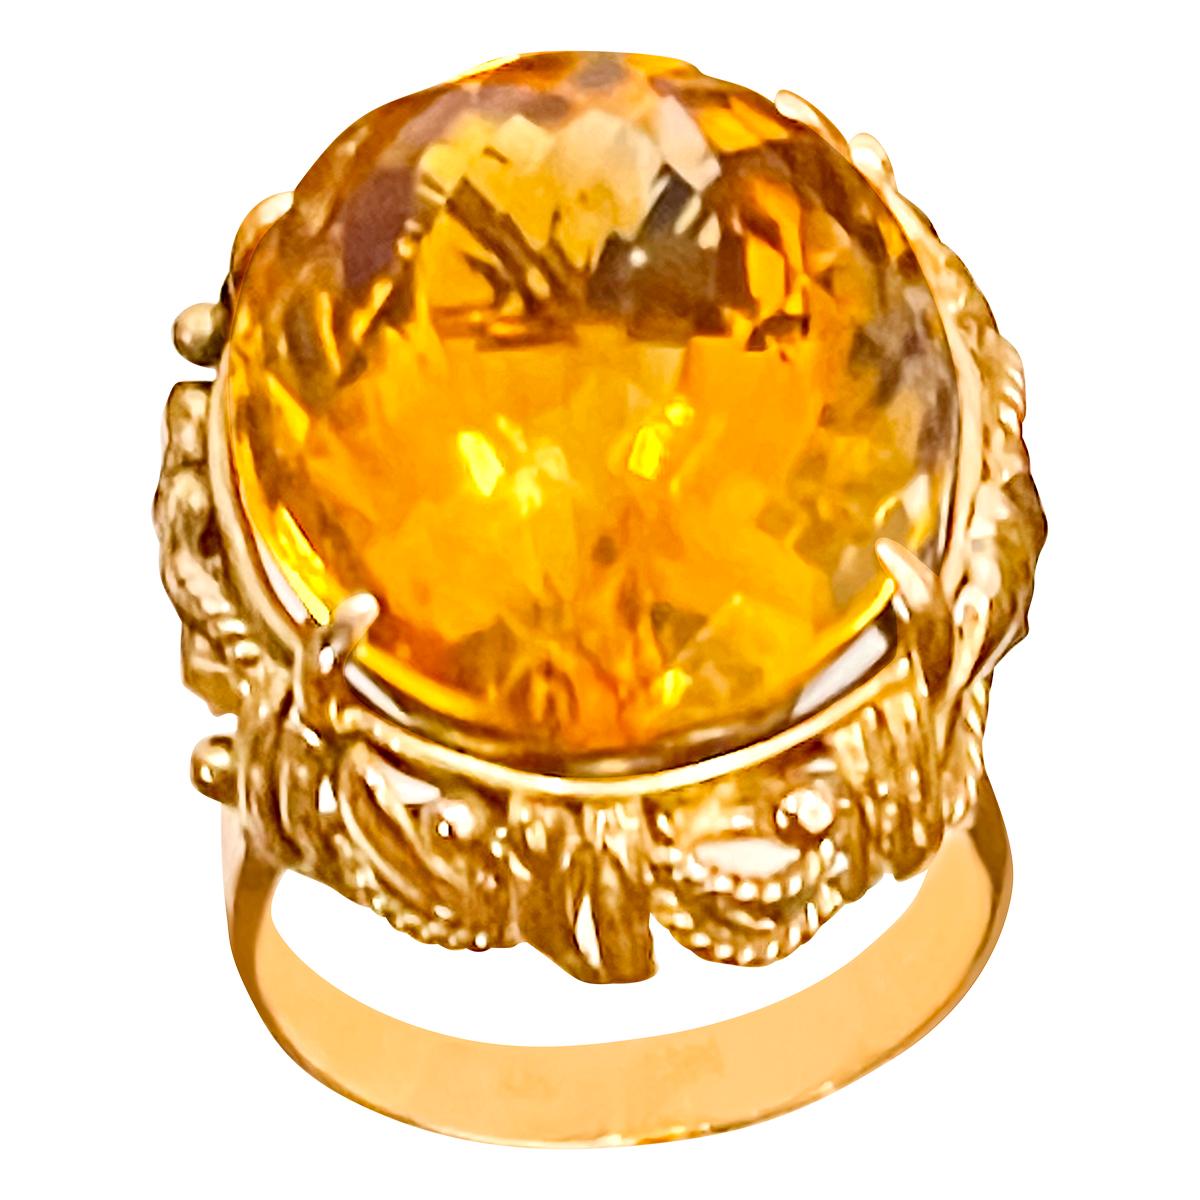 20 Carat Natural Oval Citrine Cocktail Ring in 14 Karat Yellow Gold, Estate For Sale